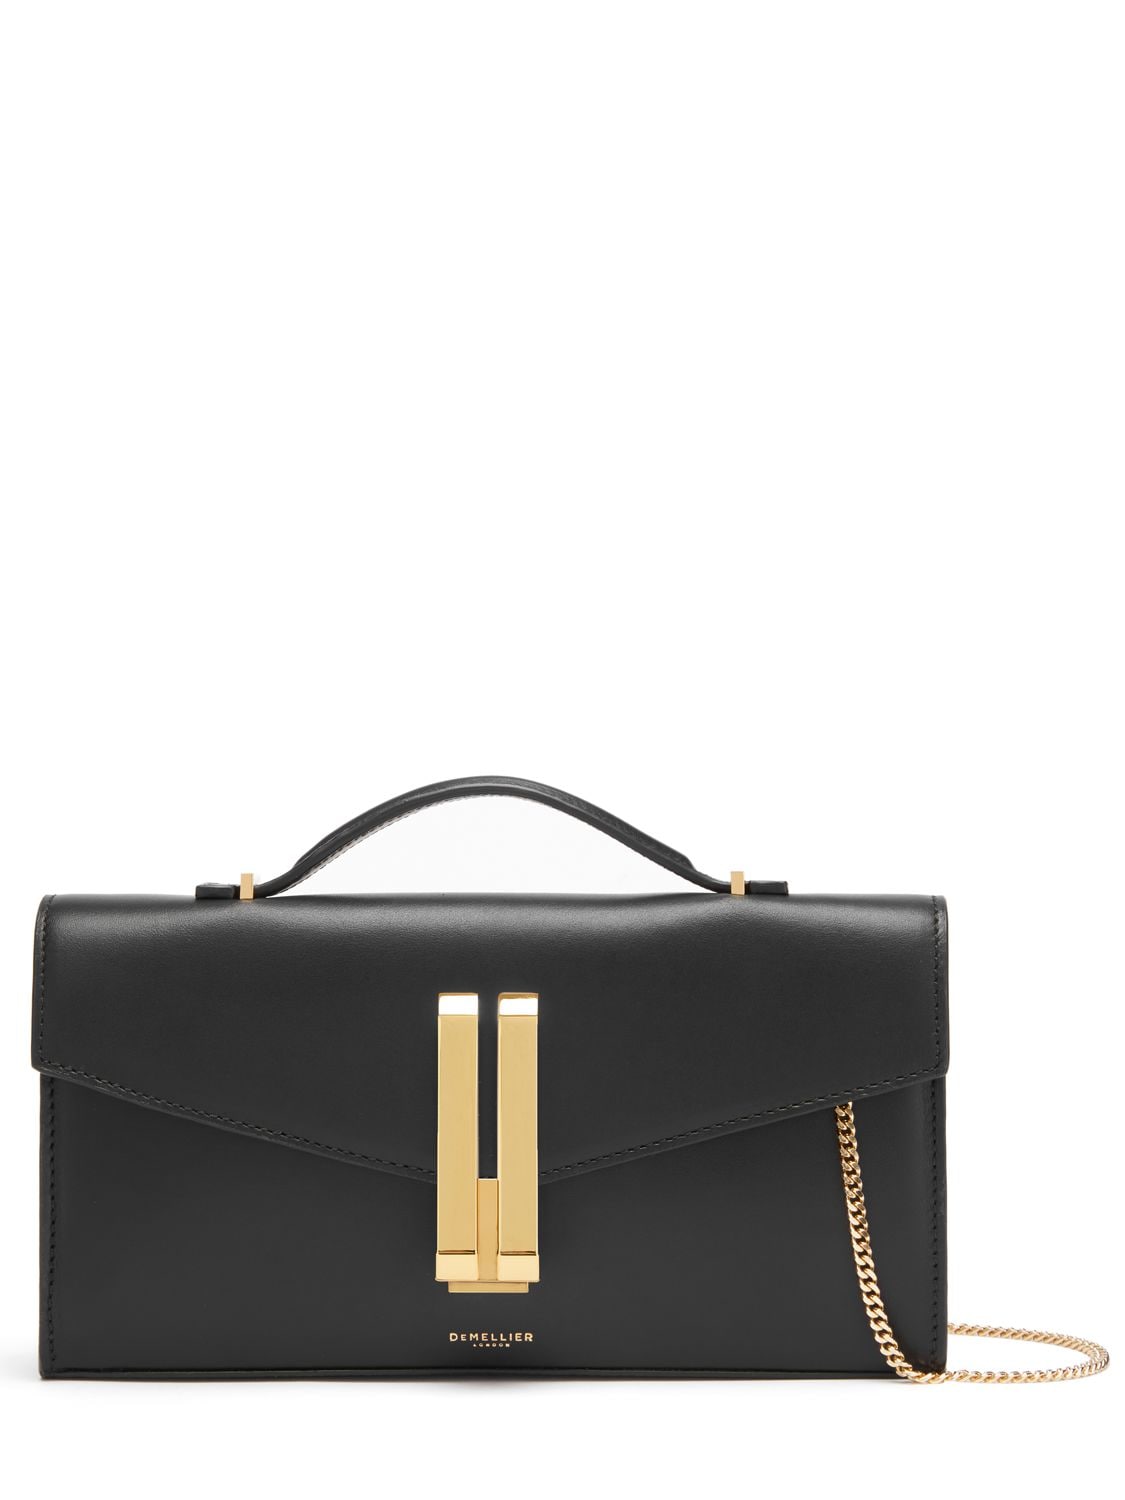 Demellier Vancouver Smooth Leather Clutch In Black